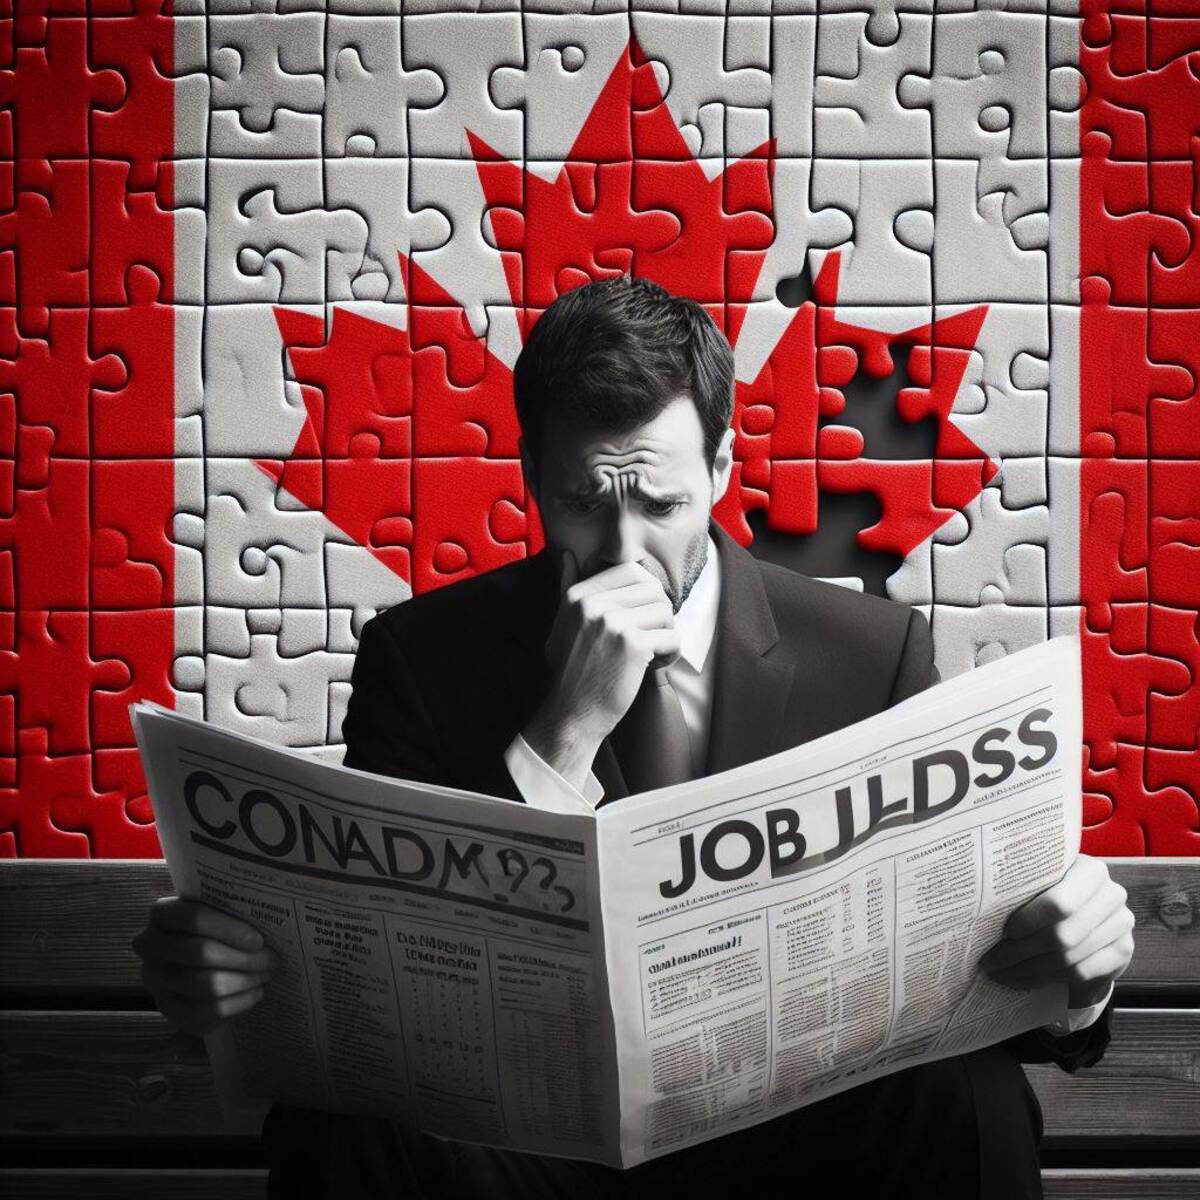 The Bank Can’t Print Jobs: Can Canada’s Policymakers Navigate the Economic Crossroads?